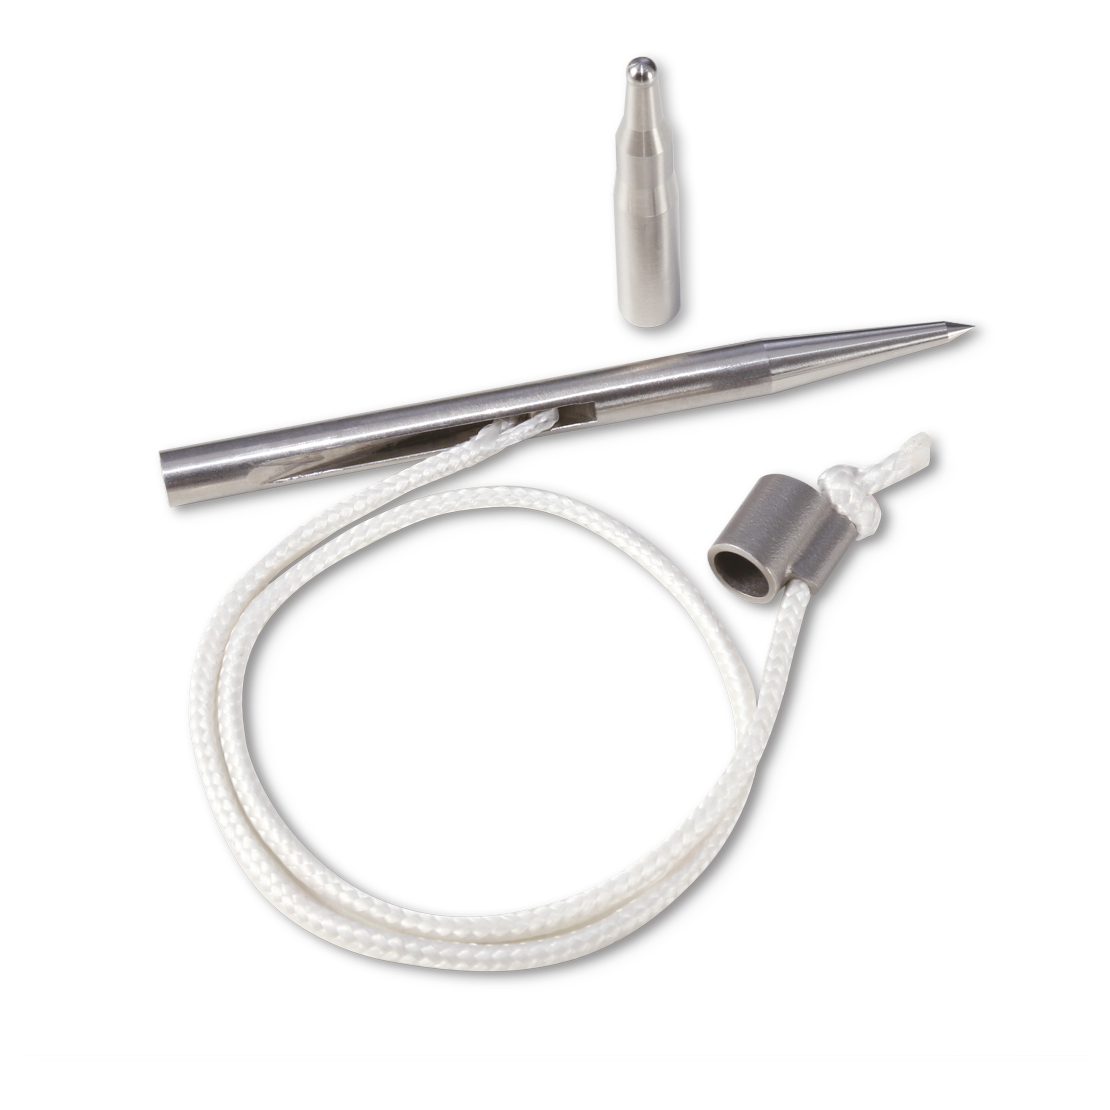 Stainless steel Slip Tip 6mm Threading 5" with steel cable speargun 